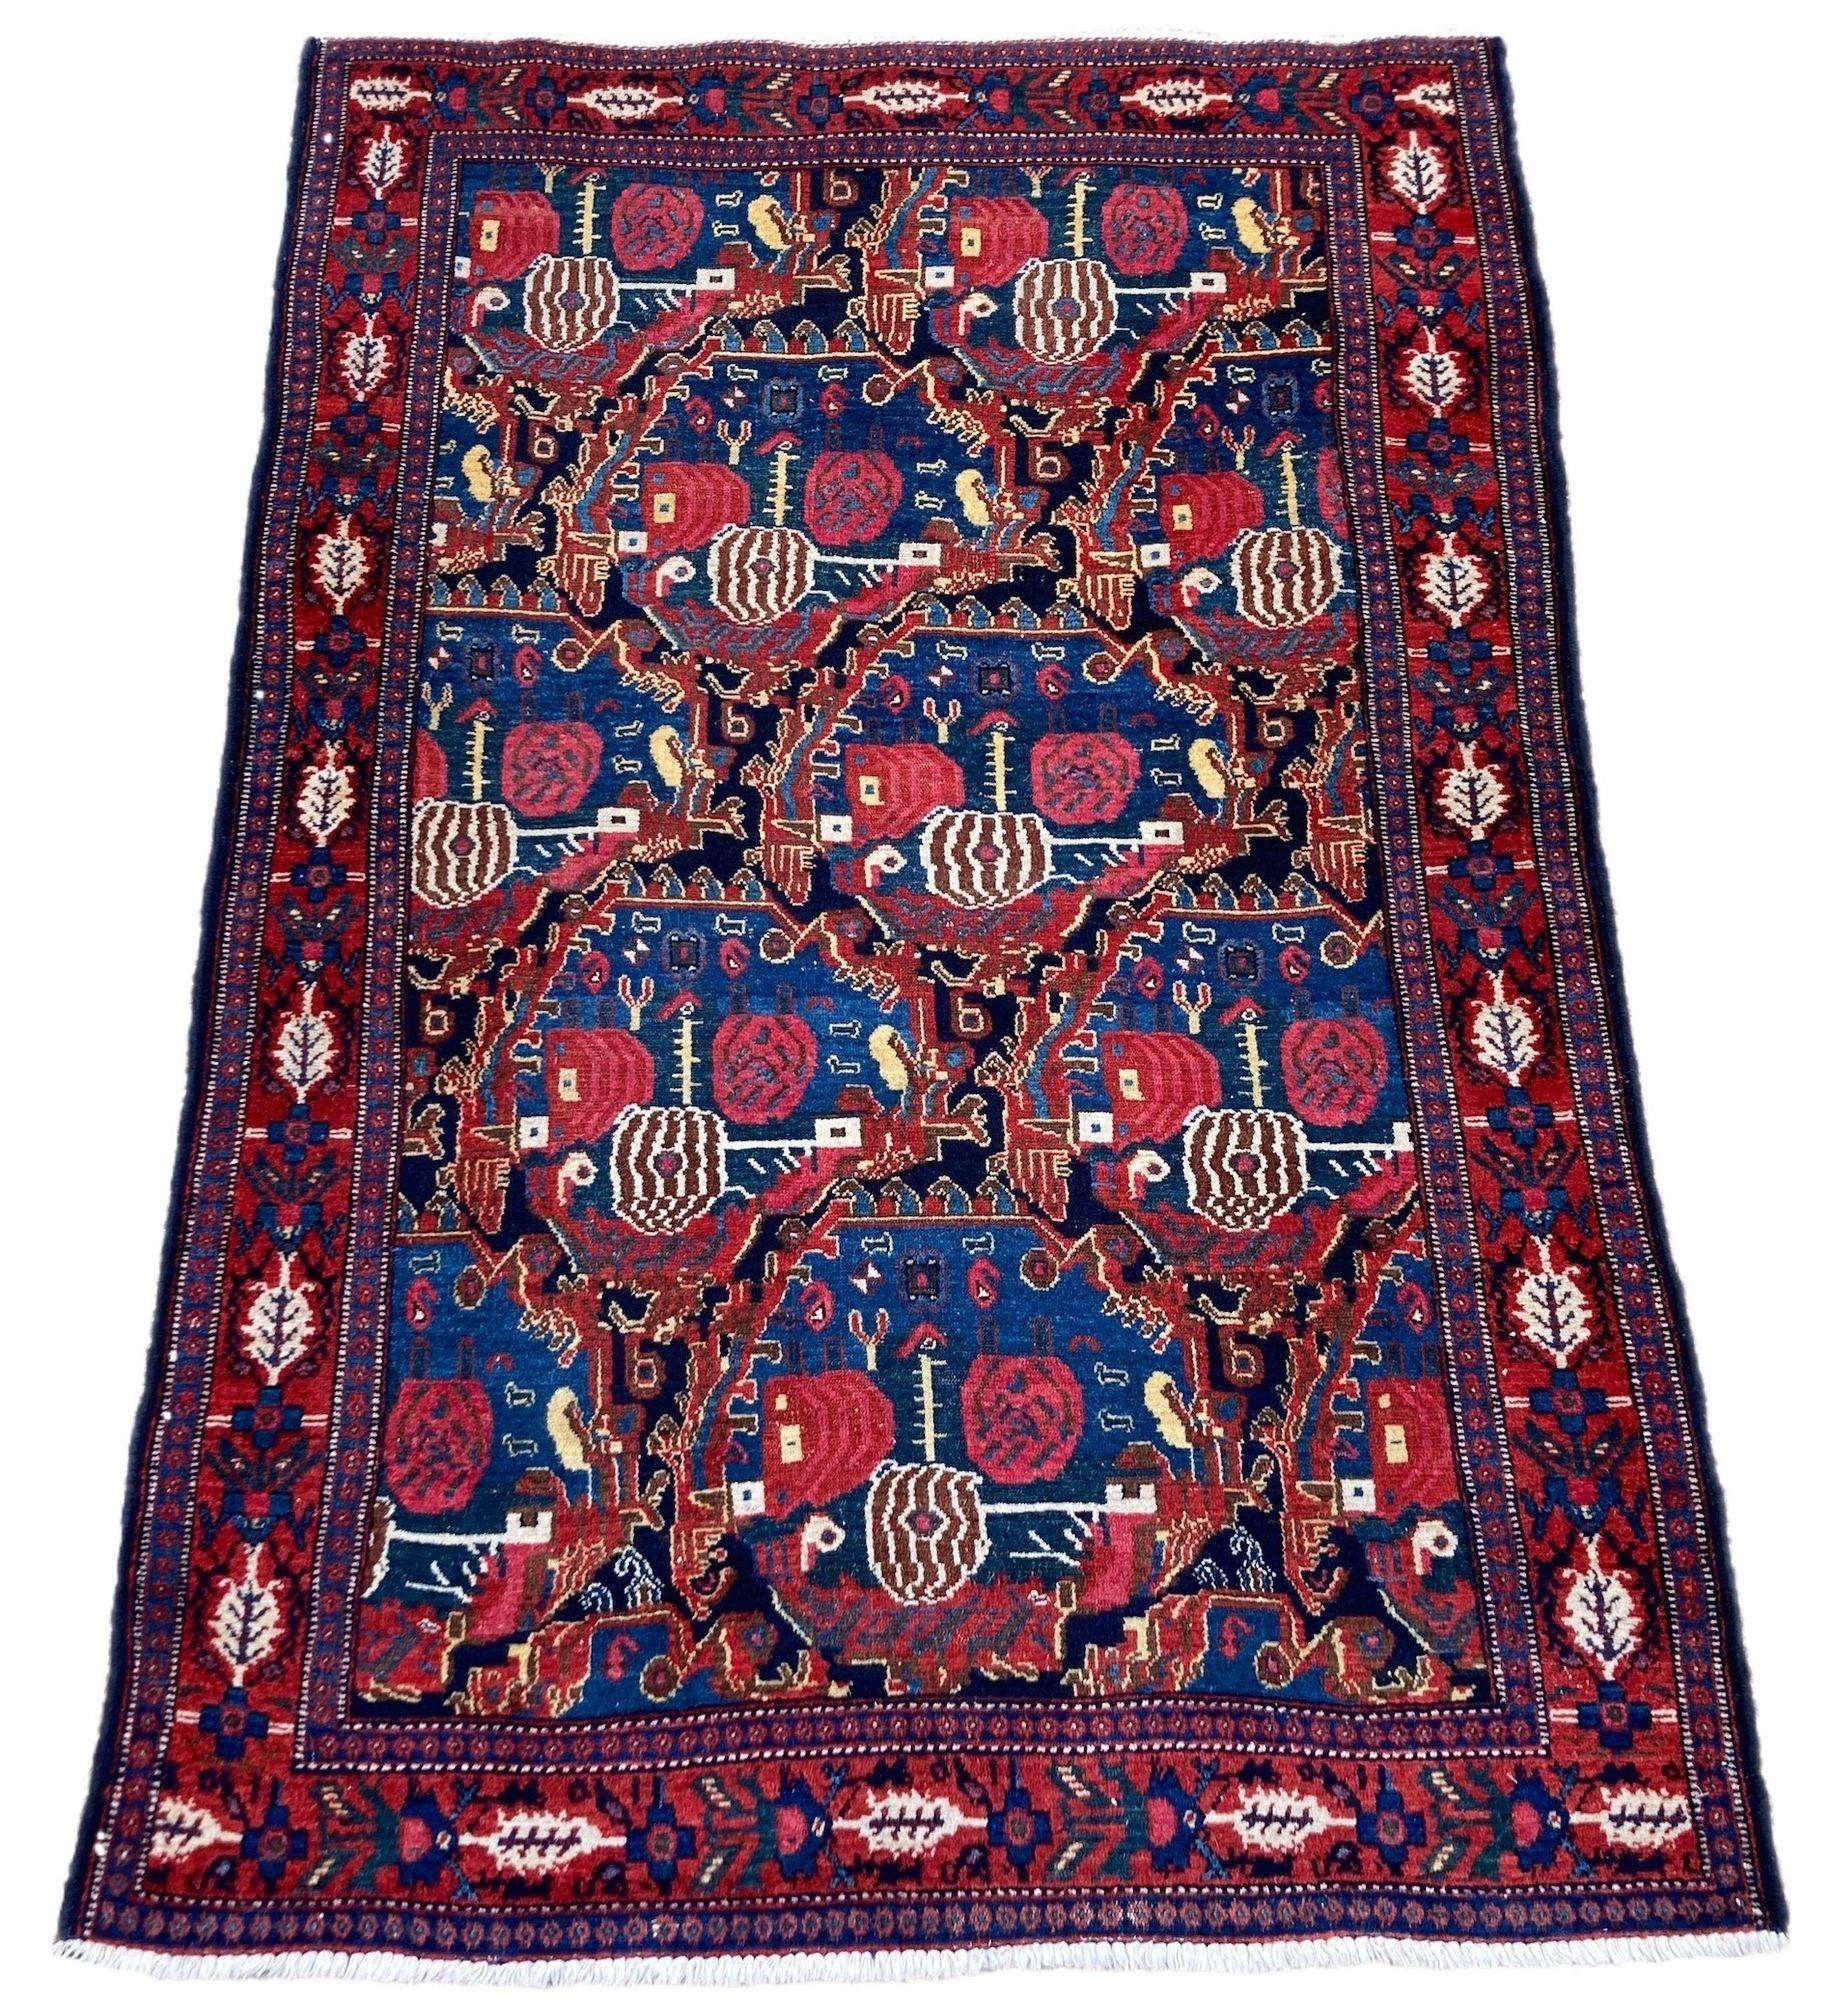 A beautiful antique Senneh rug, hand woven circa 1900 featuring a Gol Farang (literally ‘foreign flower’) design on a deep indigo field. Finely woven with great quality wool and wonderful colours of blues, yellows and reds.
Size: 1.55m x 1.07m (5ft